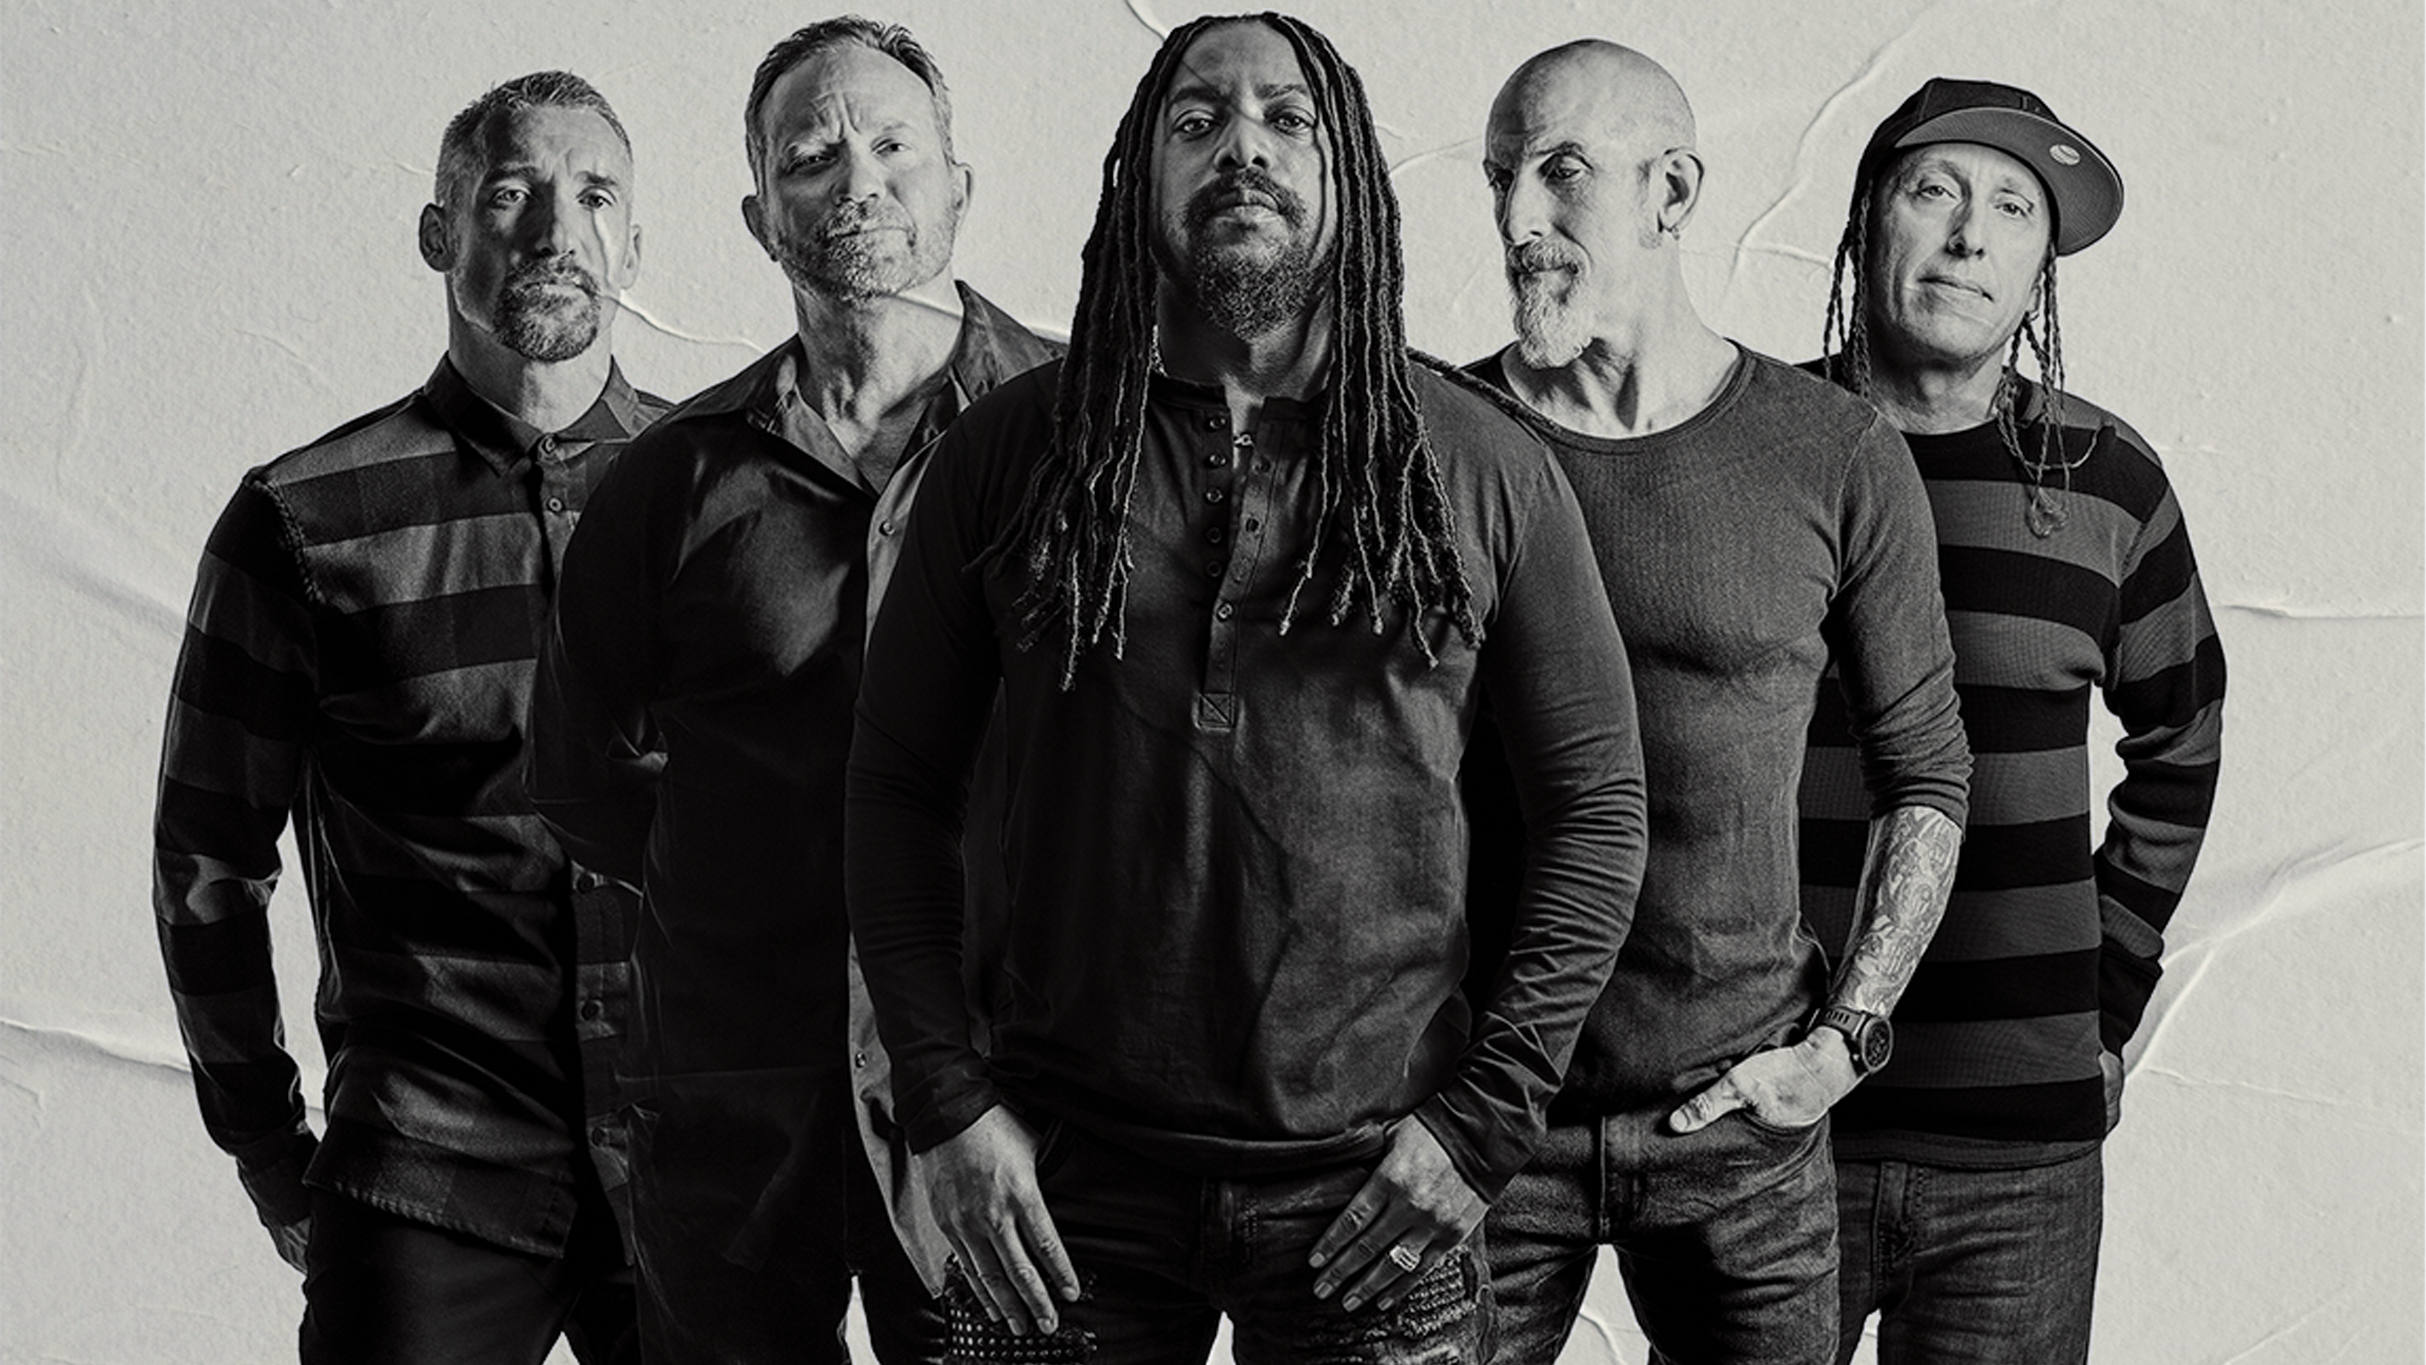 members only presale password for Sevendust Seasons 21st Anniversary Tour affordable tickets in Raleigh at The Ritz